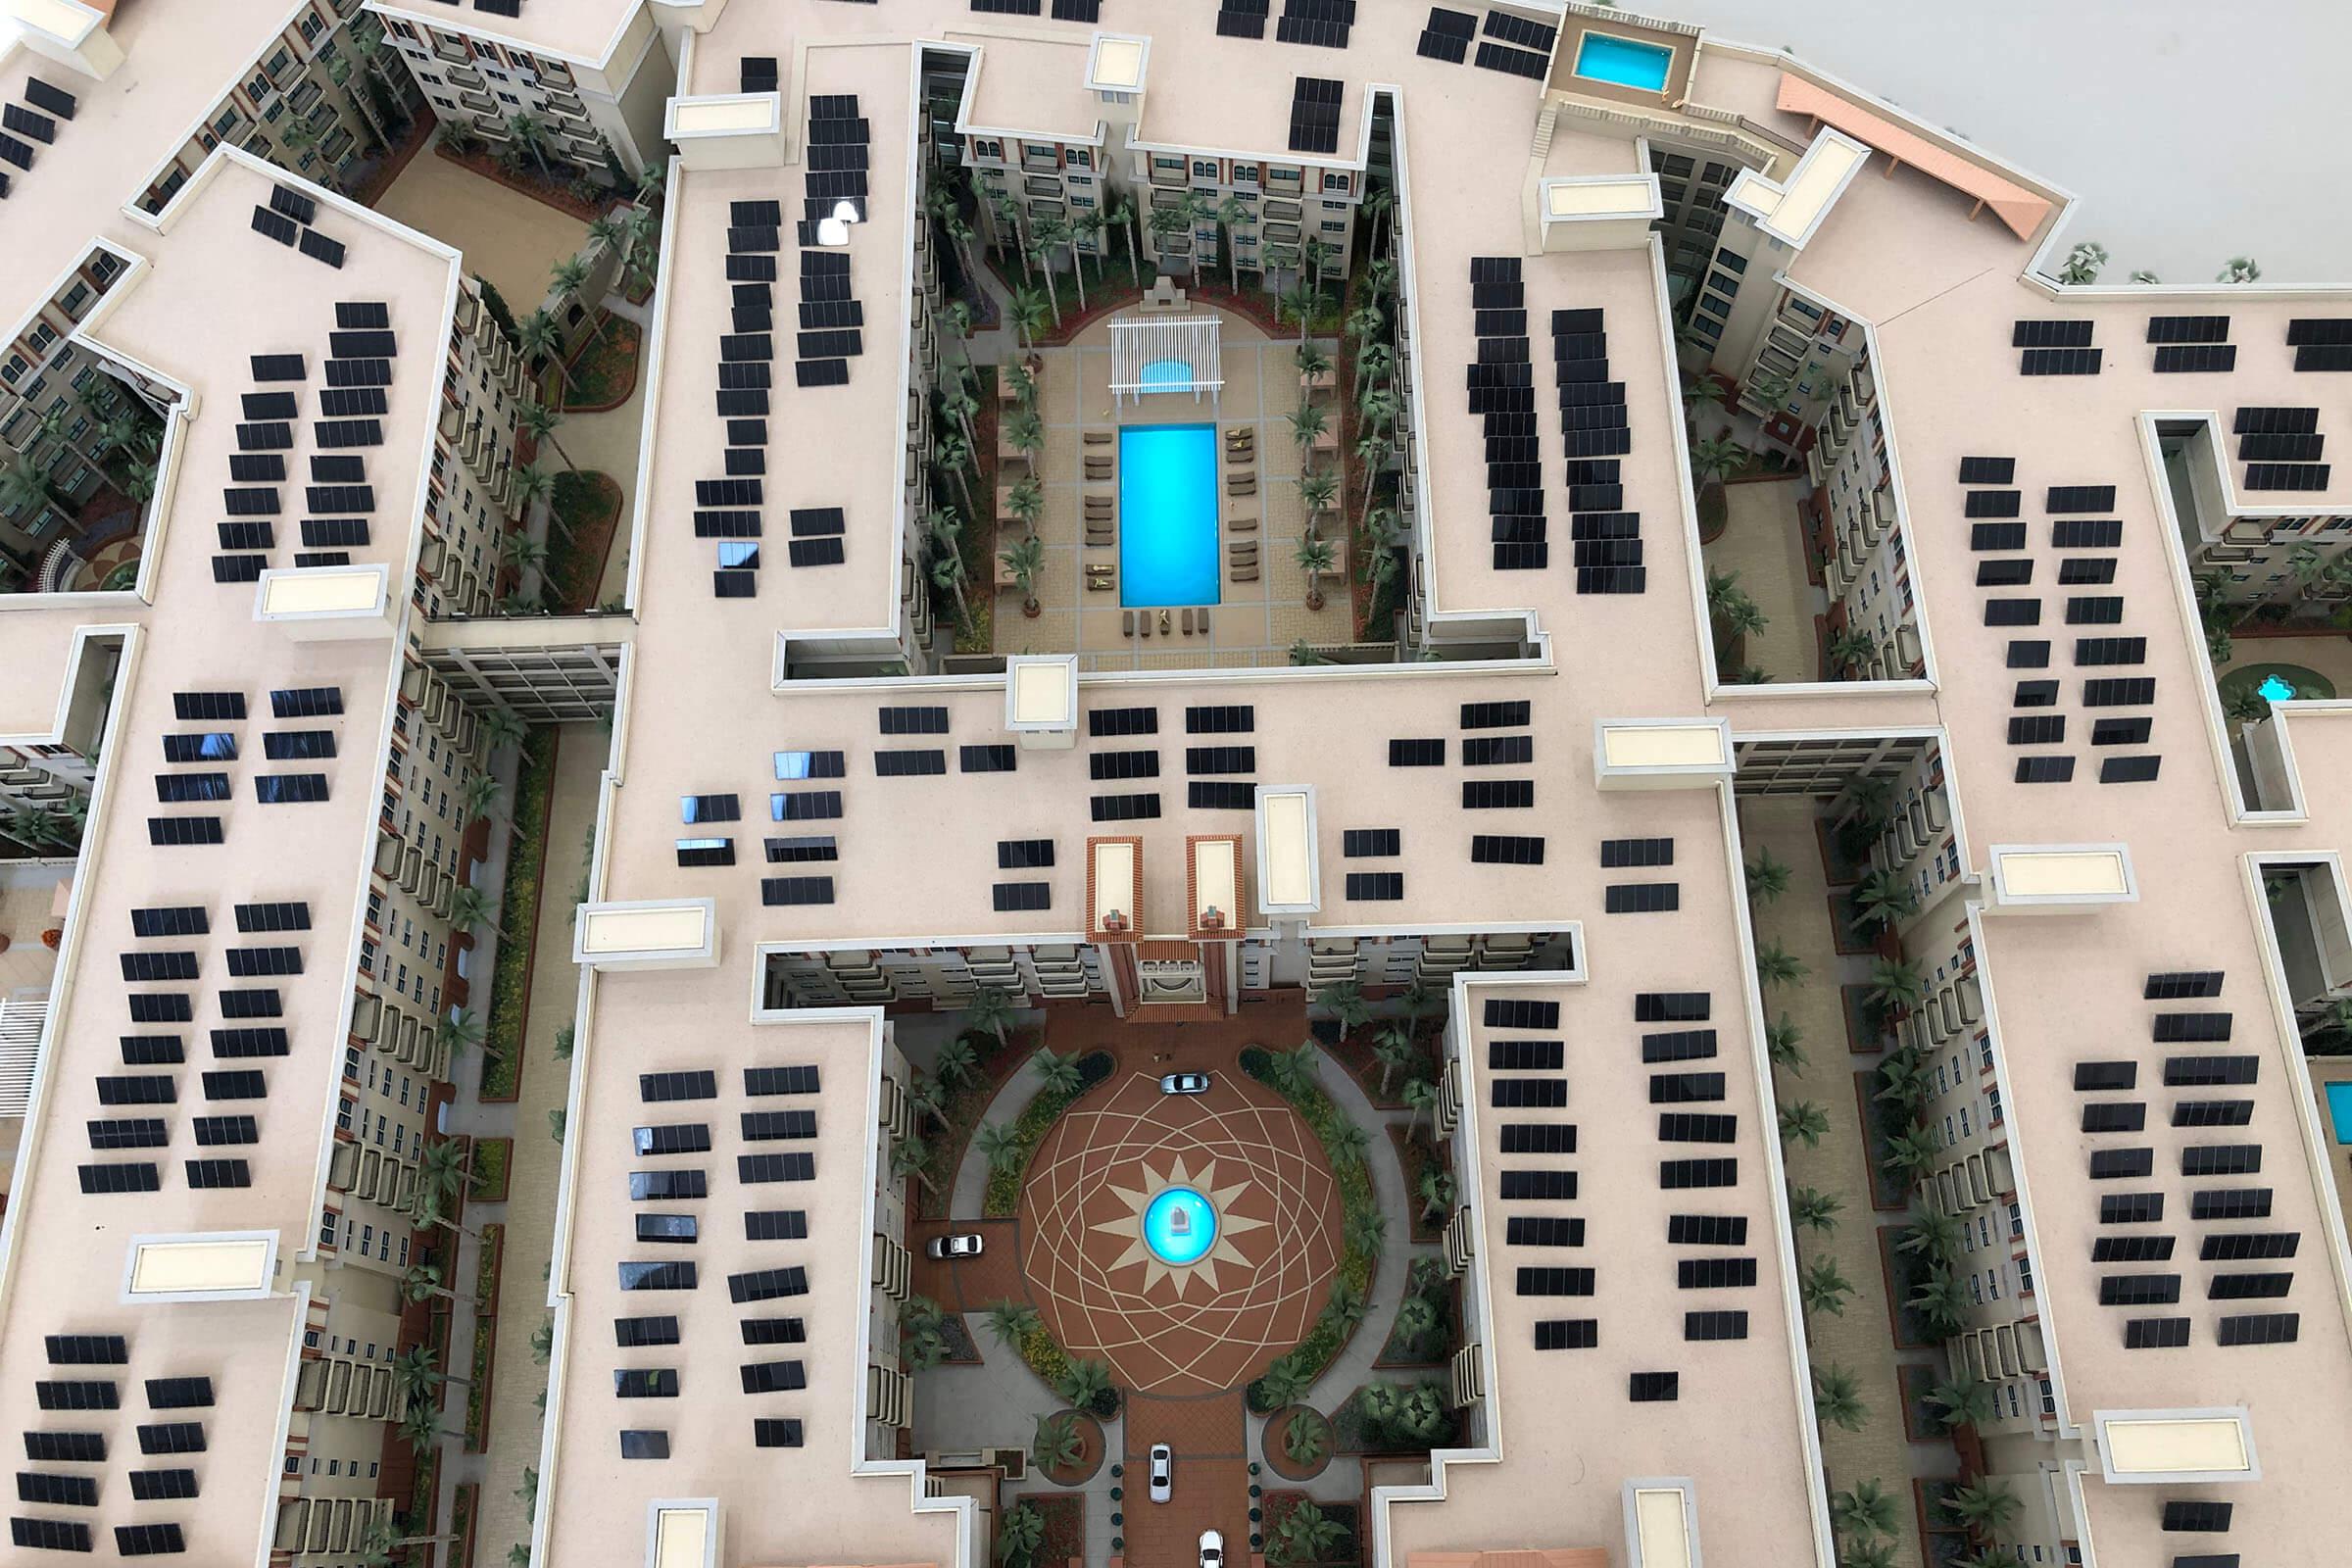 Aerial of Scale Model depicting rotunda and pool